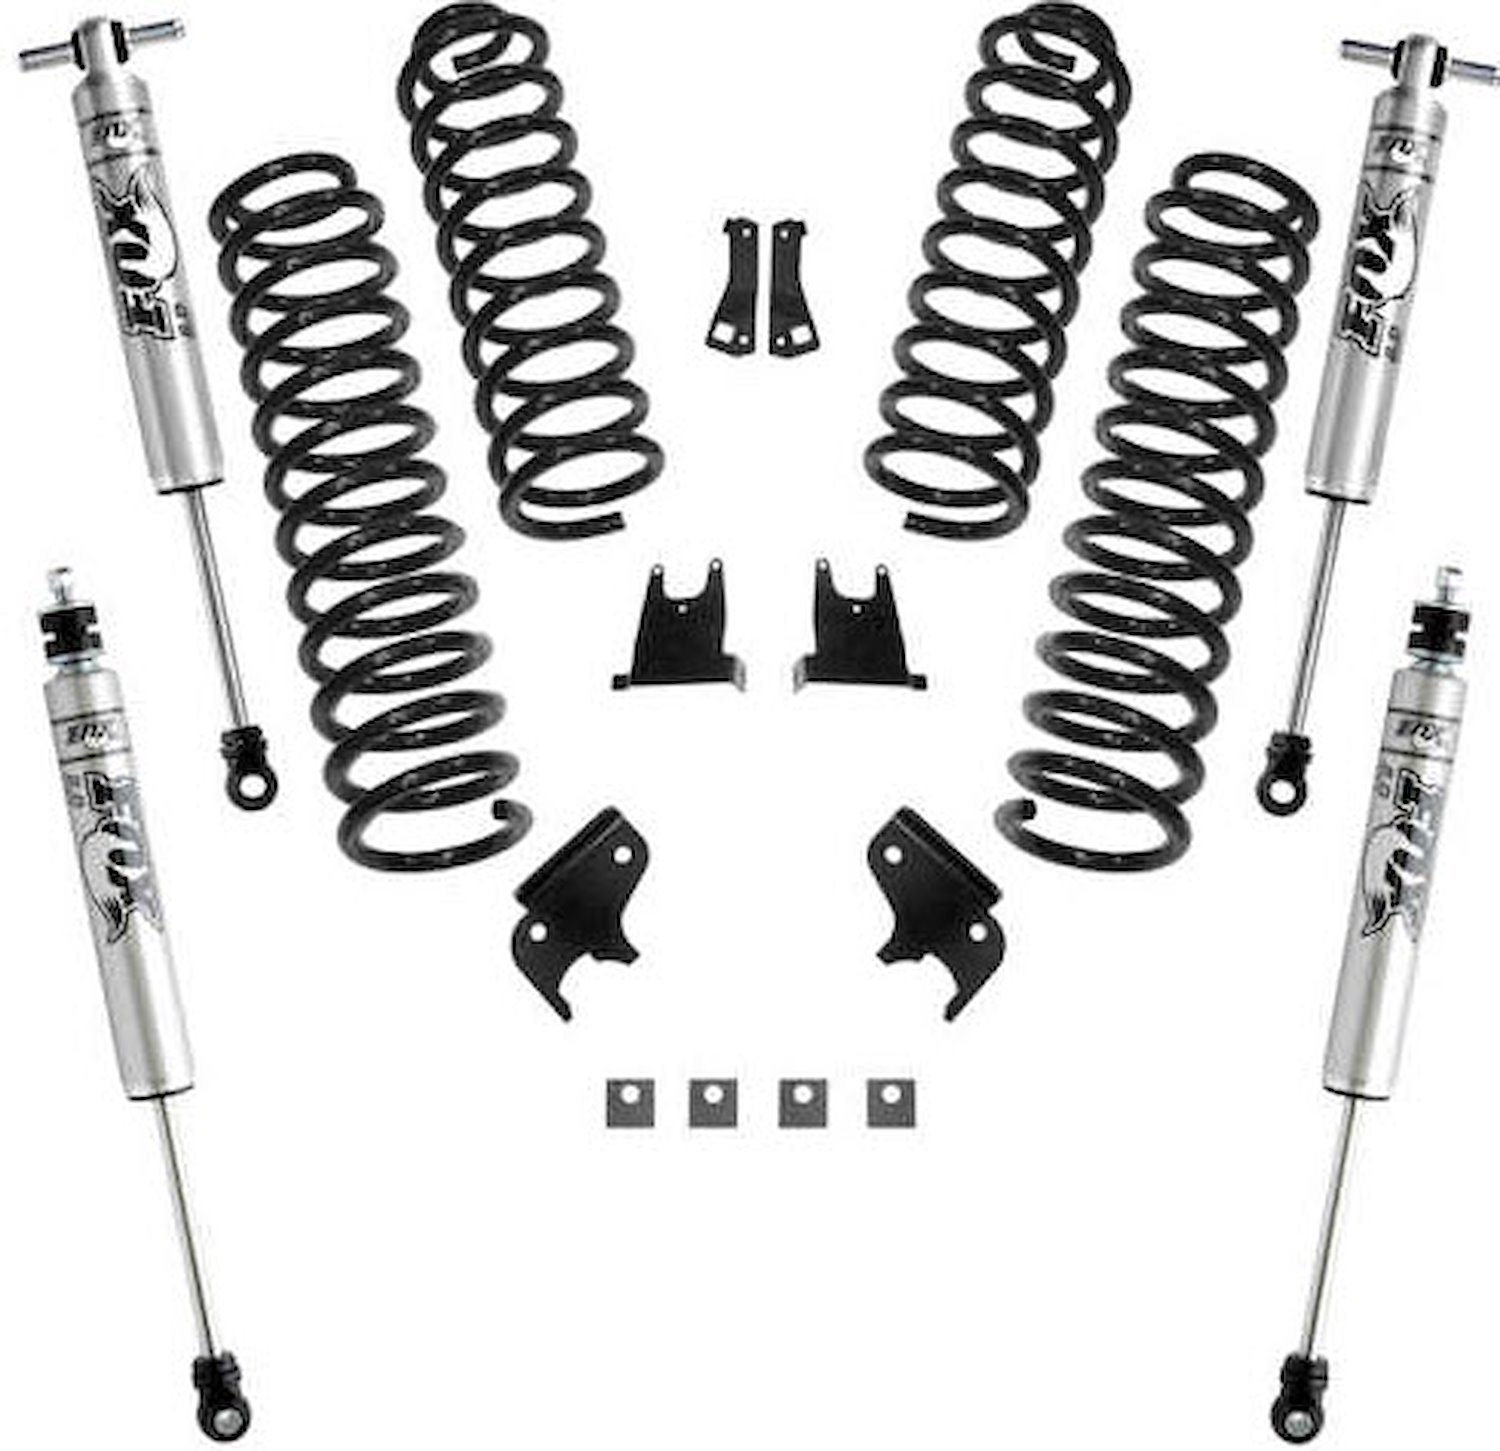 K932F Front and Rear Suspension Lift Kit, Lift Amount: 2.5 in. Front/2.5 in. Rear